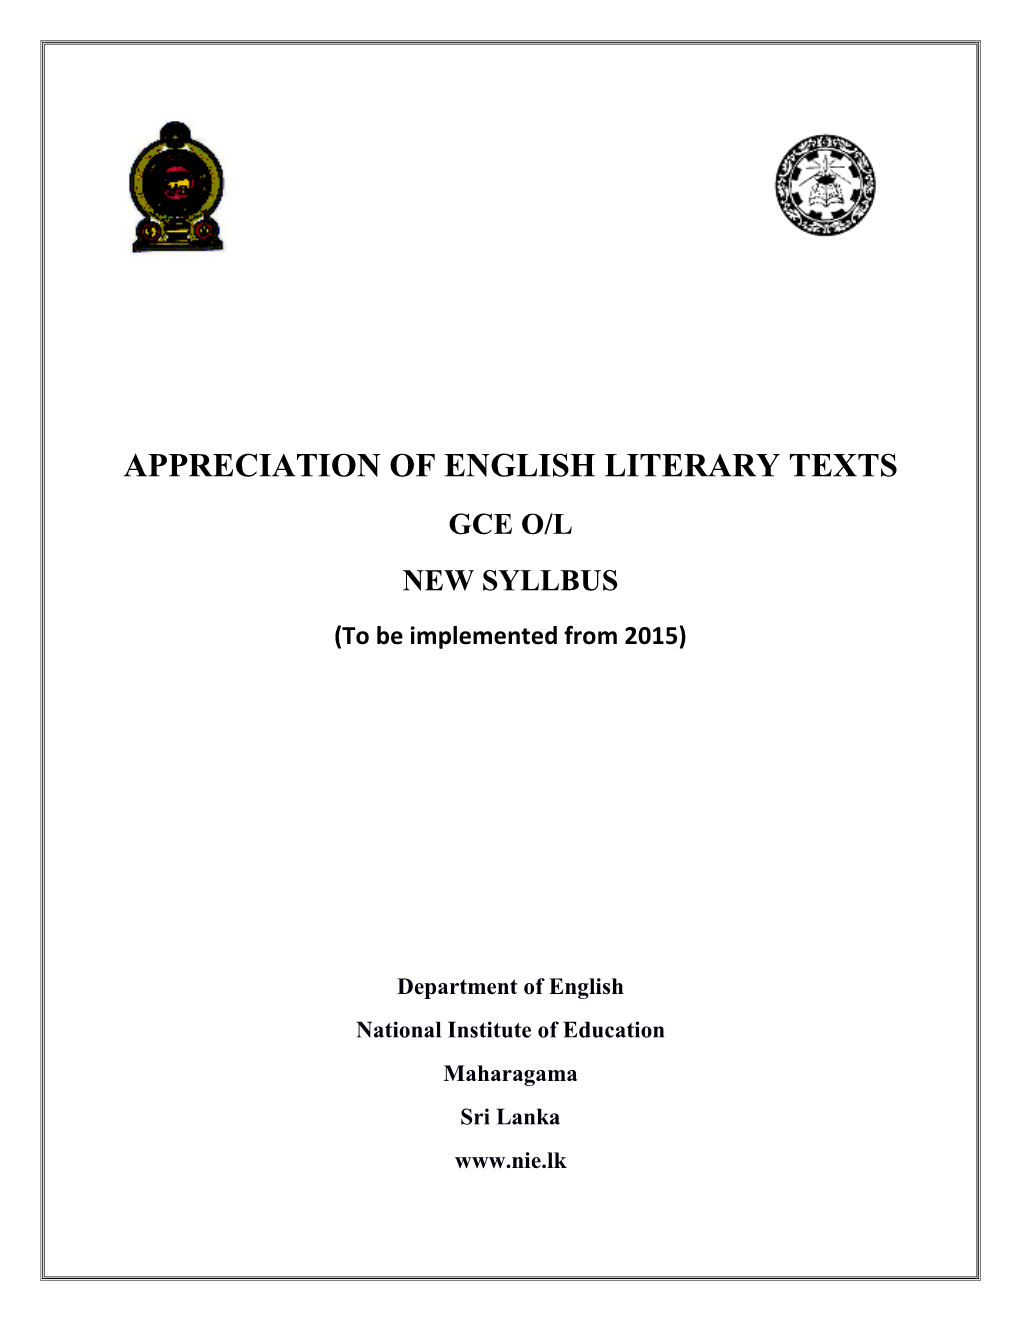 APPRECIATION of ENGLISH LITERARY TEXTS GCE O/L NEW SYLLBUS (To Be Implemented from 2015)